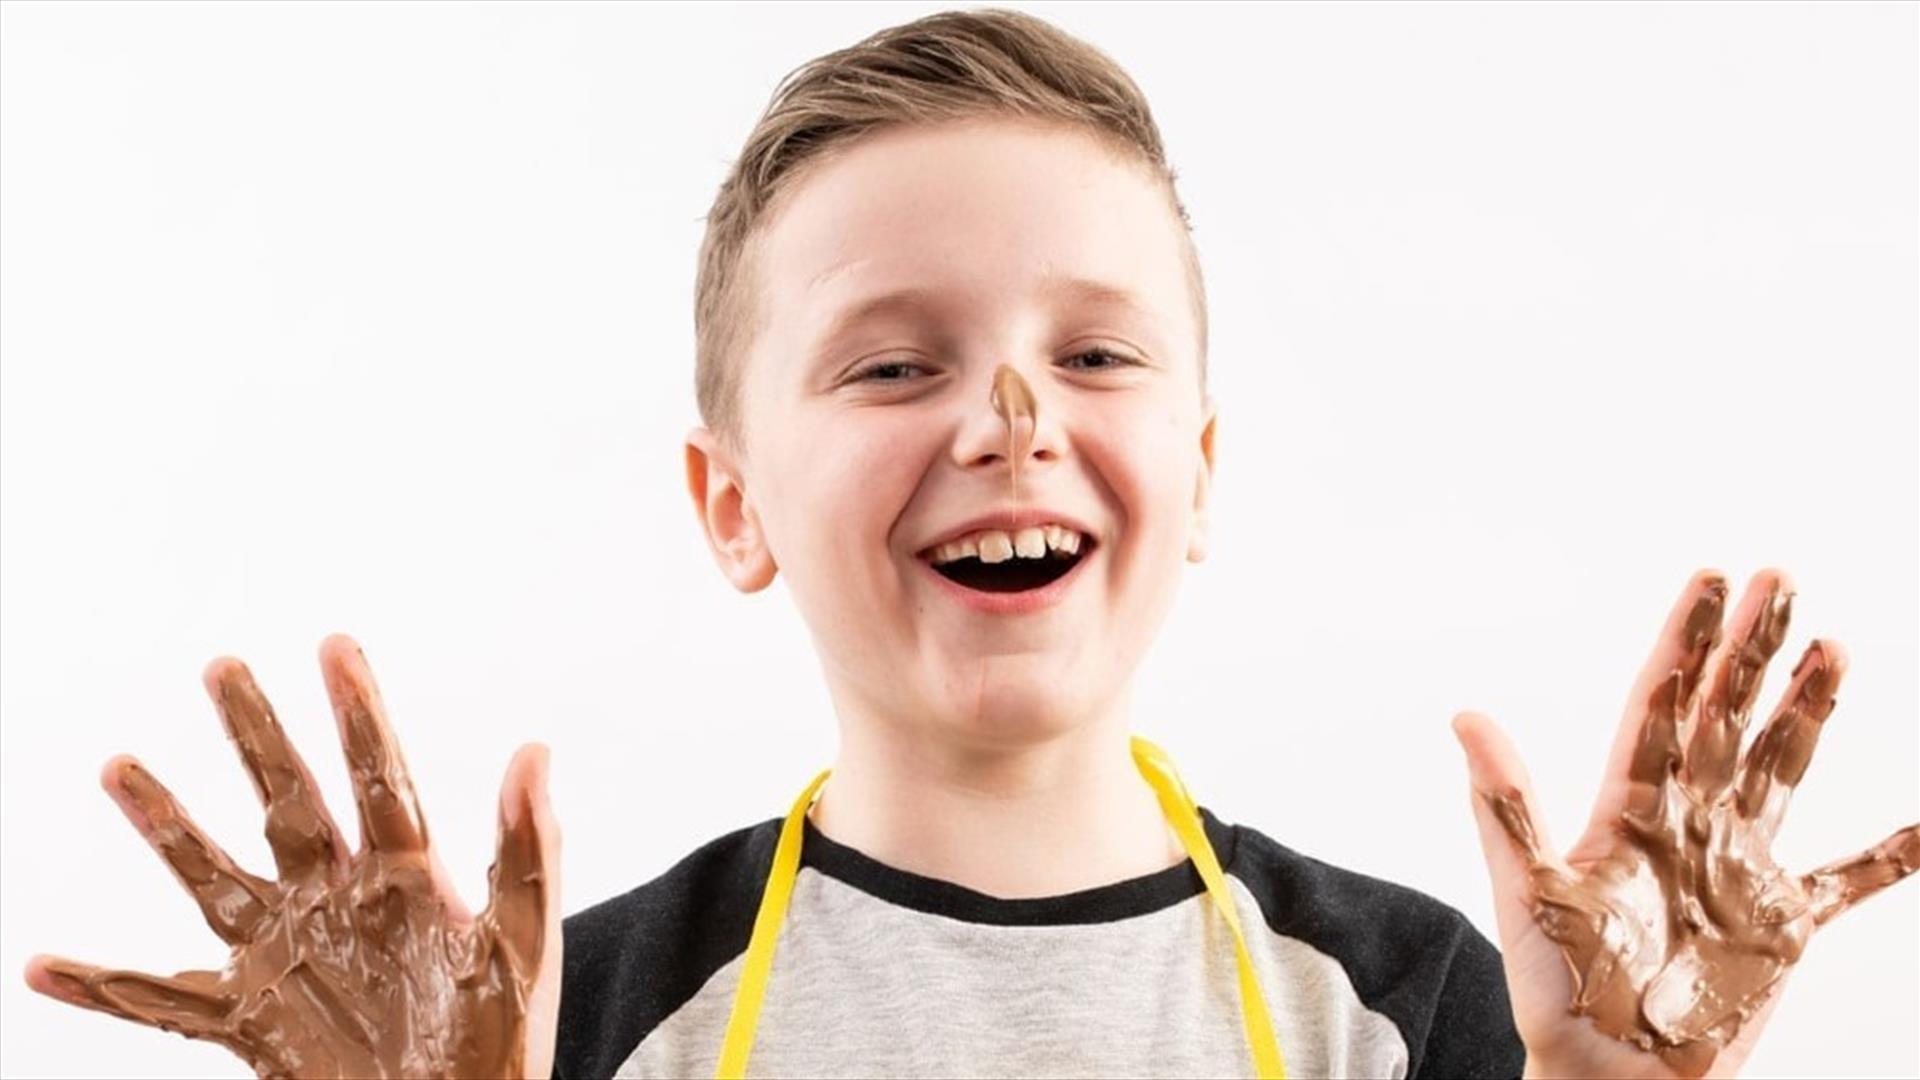 boy with hands covered in melted chocolate